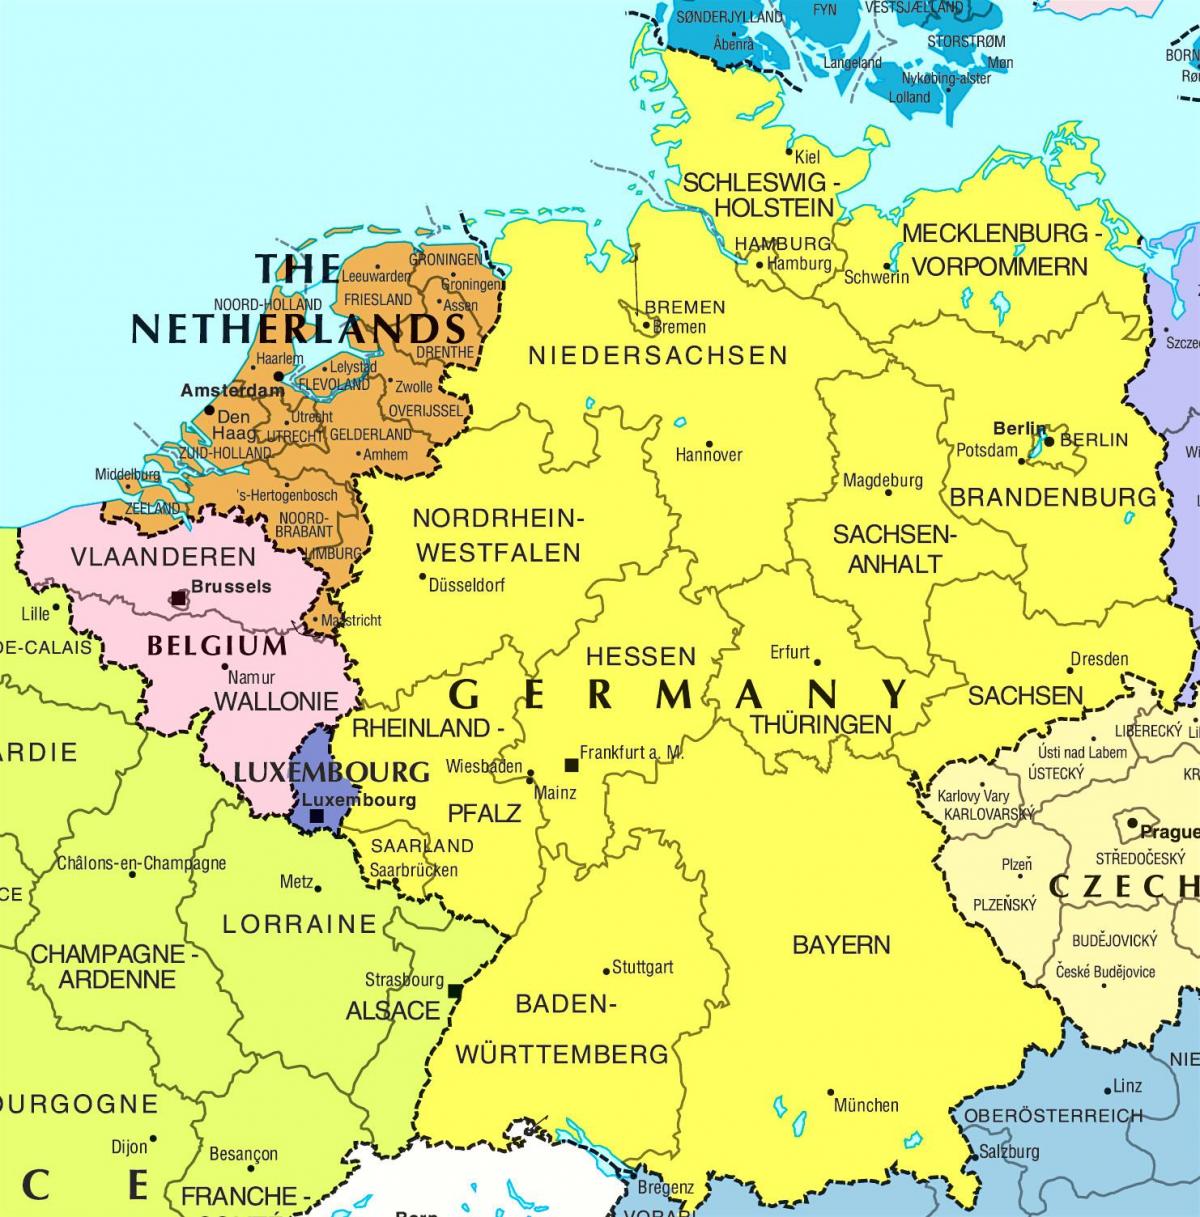 Germany map images - Germany municipalities map (Western Europe - Europe)